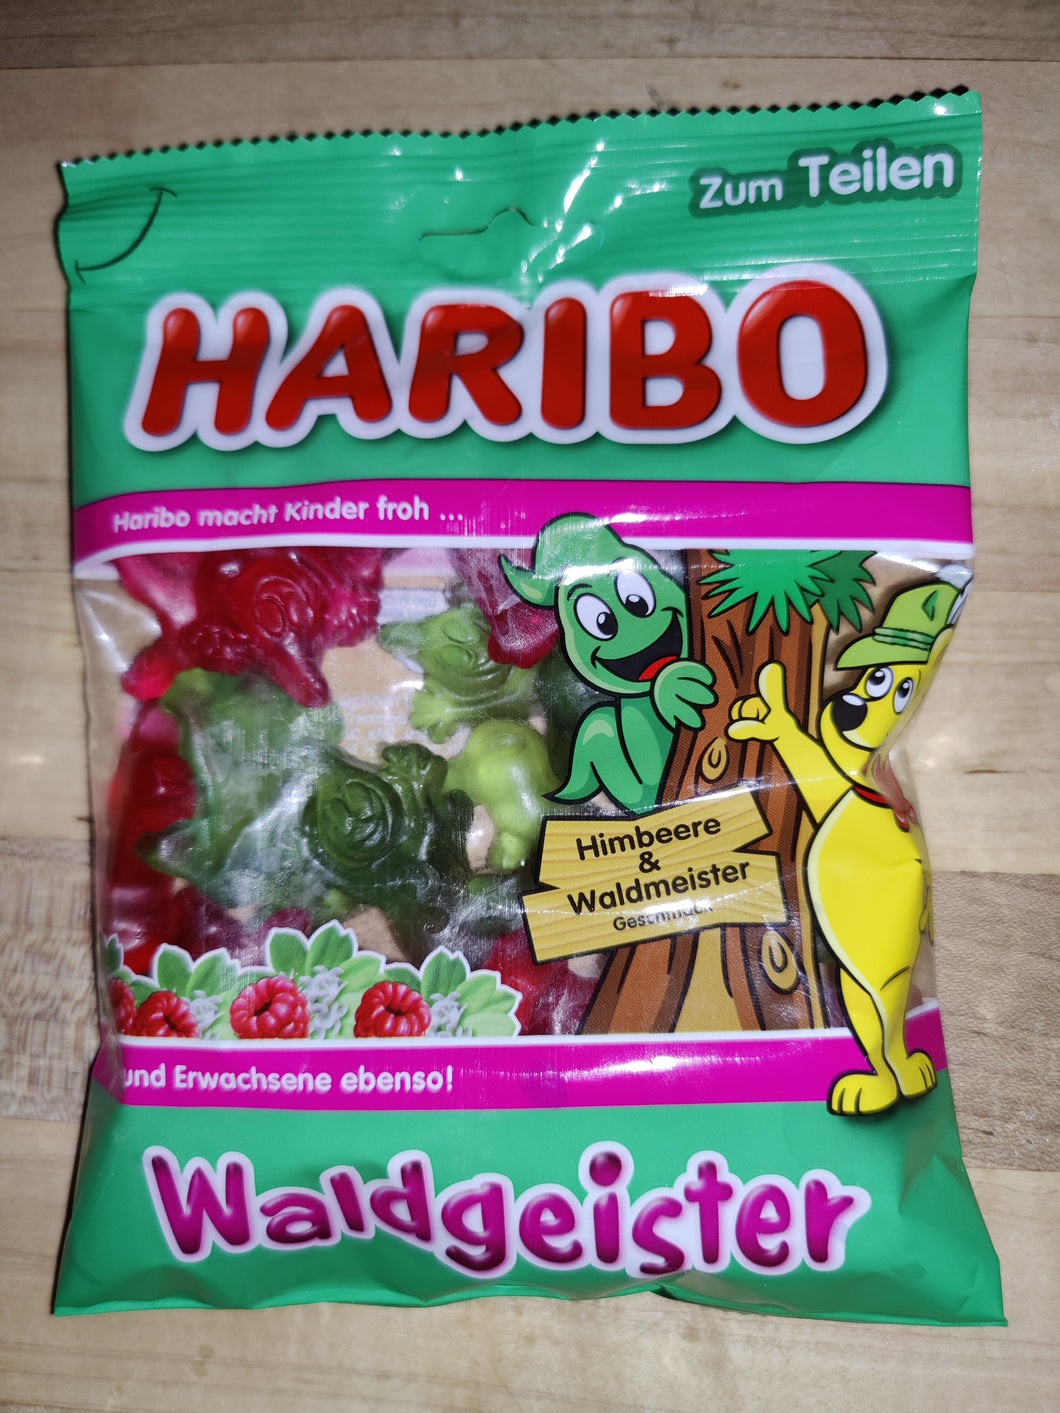 Haribo Imported Forrest Gummies (Raspberry and Woodruff flavor) -price reduced to sell out!